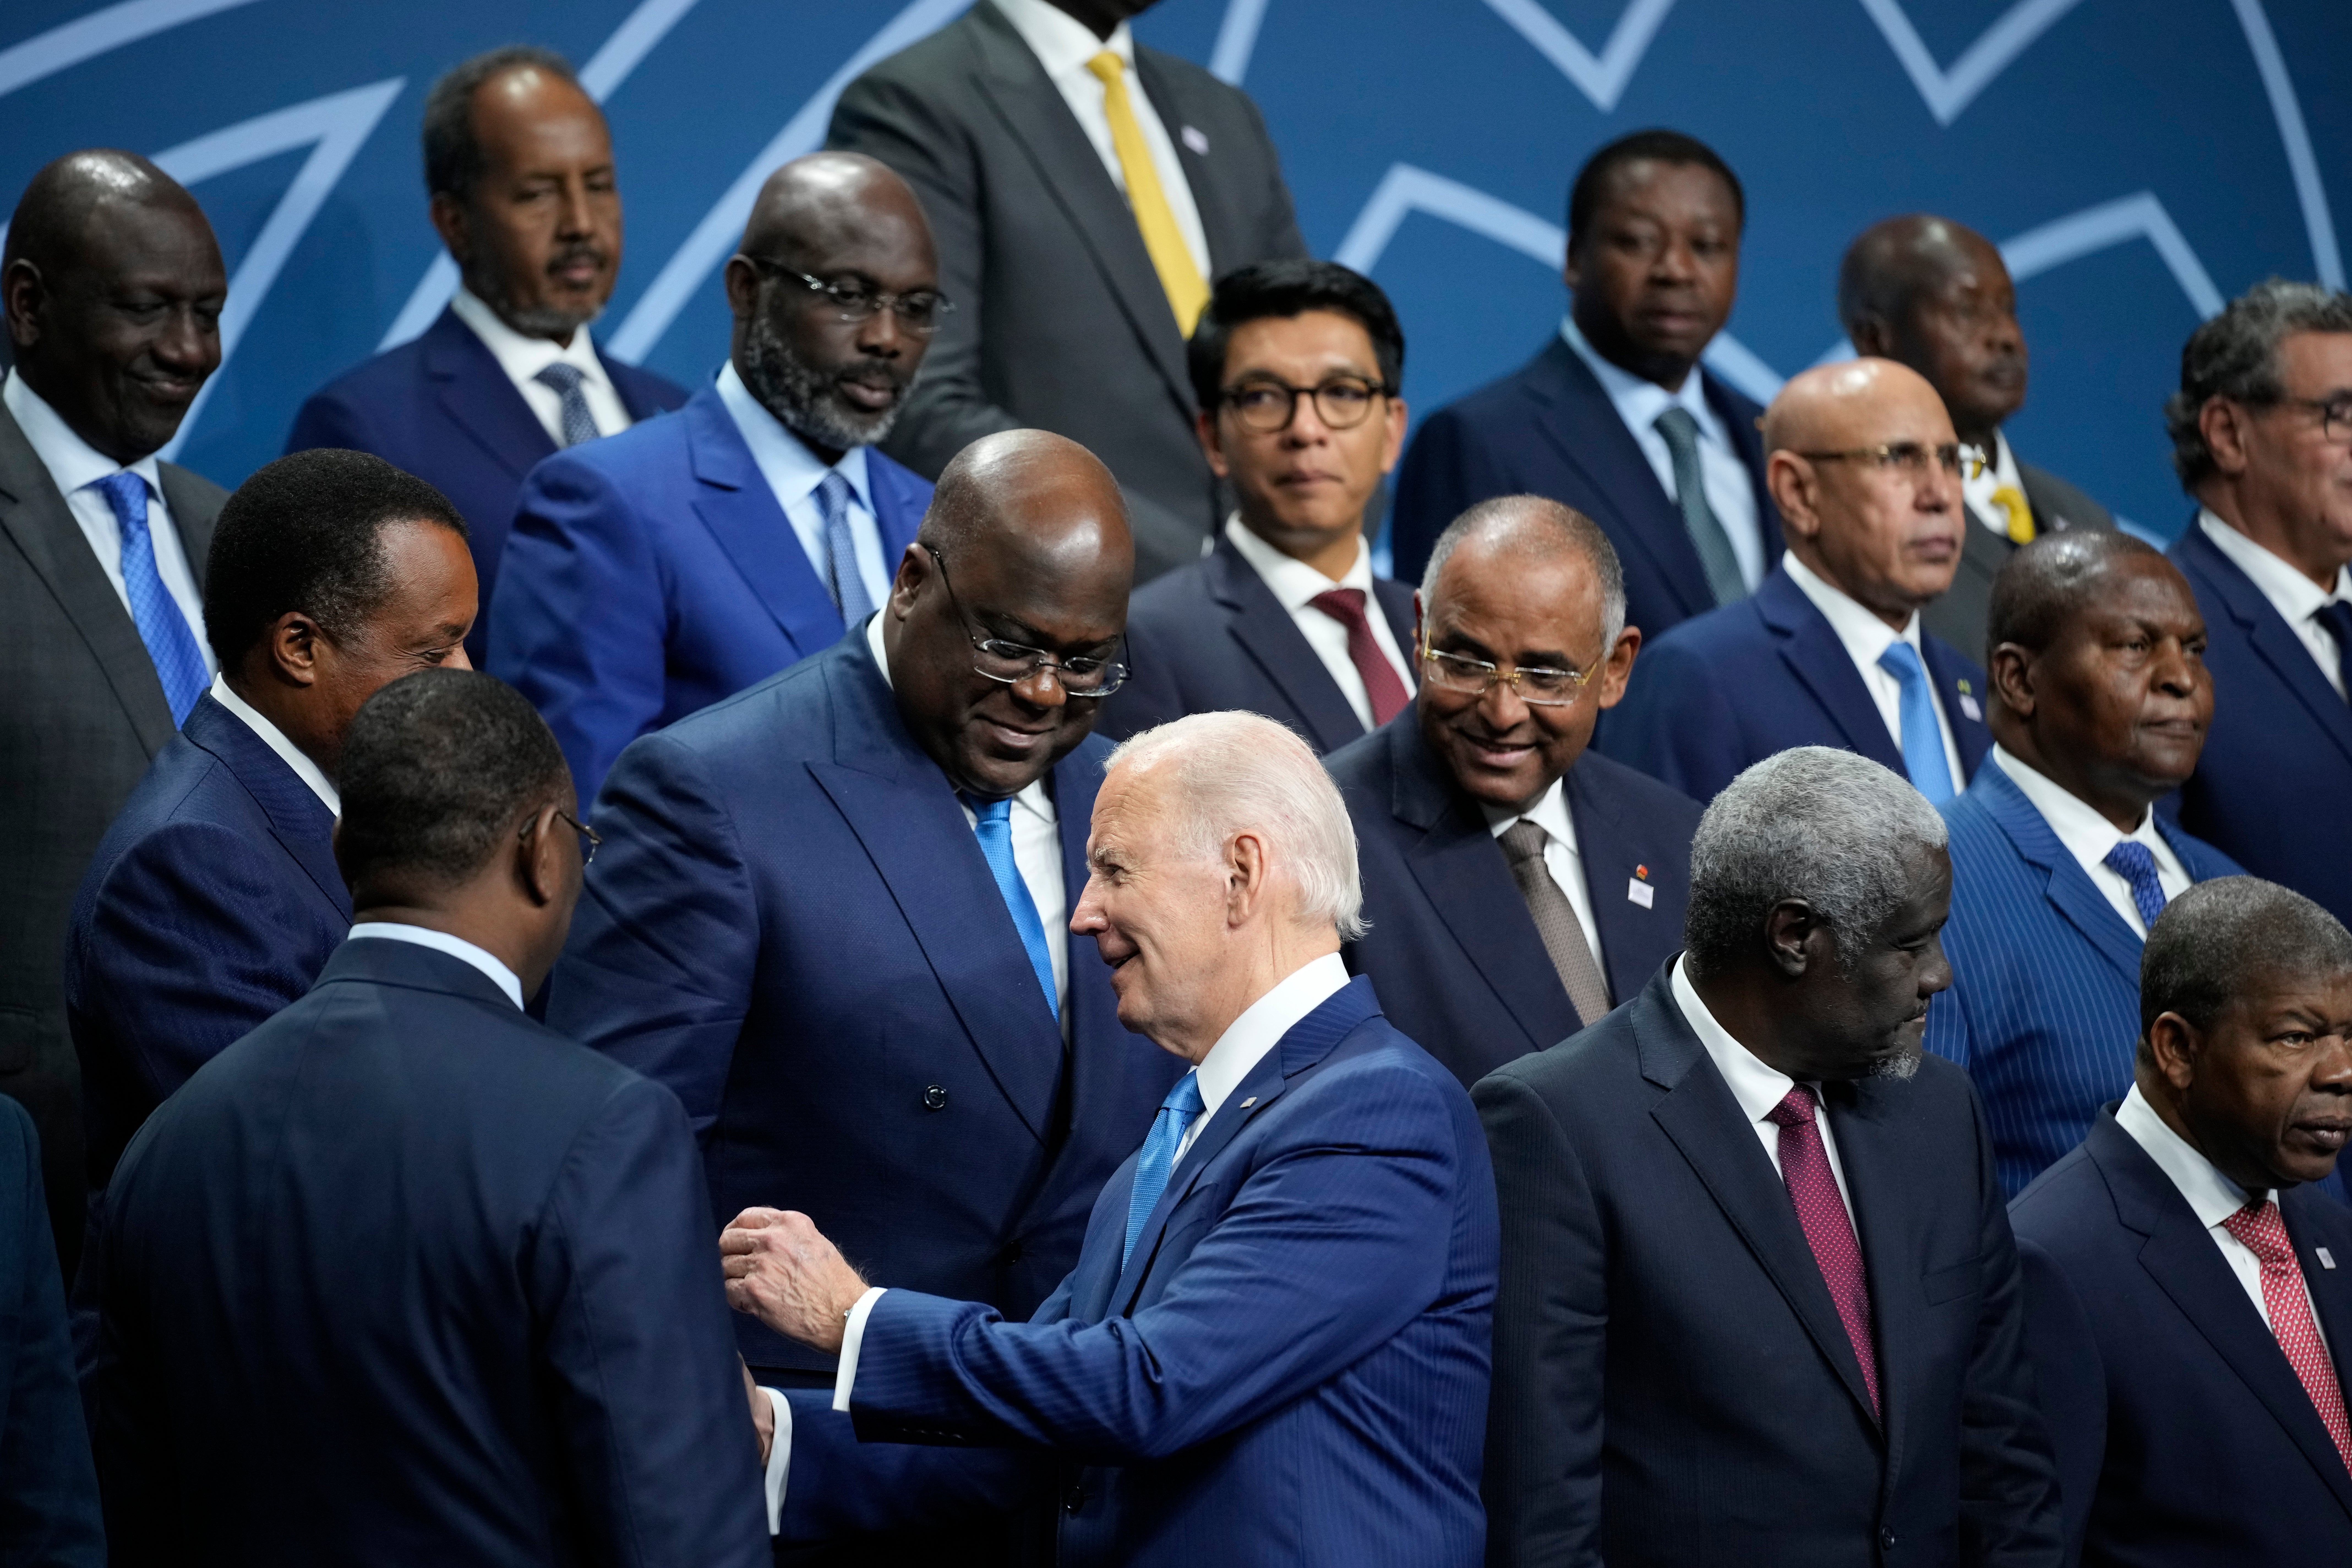 US president Joe Biden talks with African leaders before they pose for a family photo during the US-Africa Leaders Summit at the Walter E Washington Convention Center in Washington, 15 December 2022